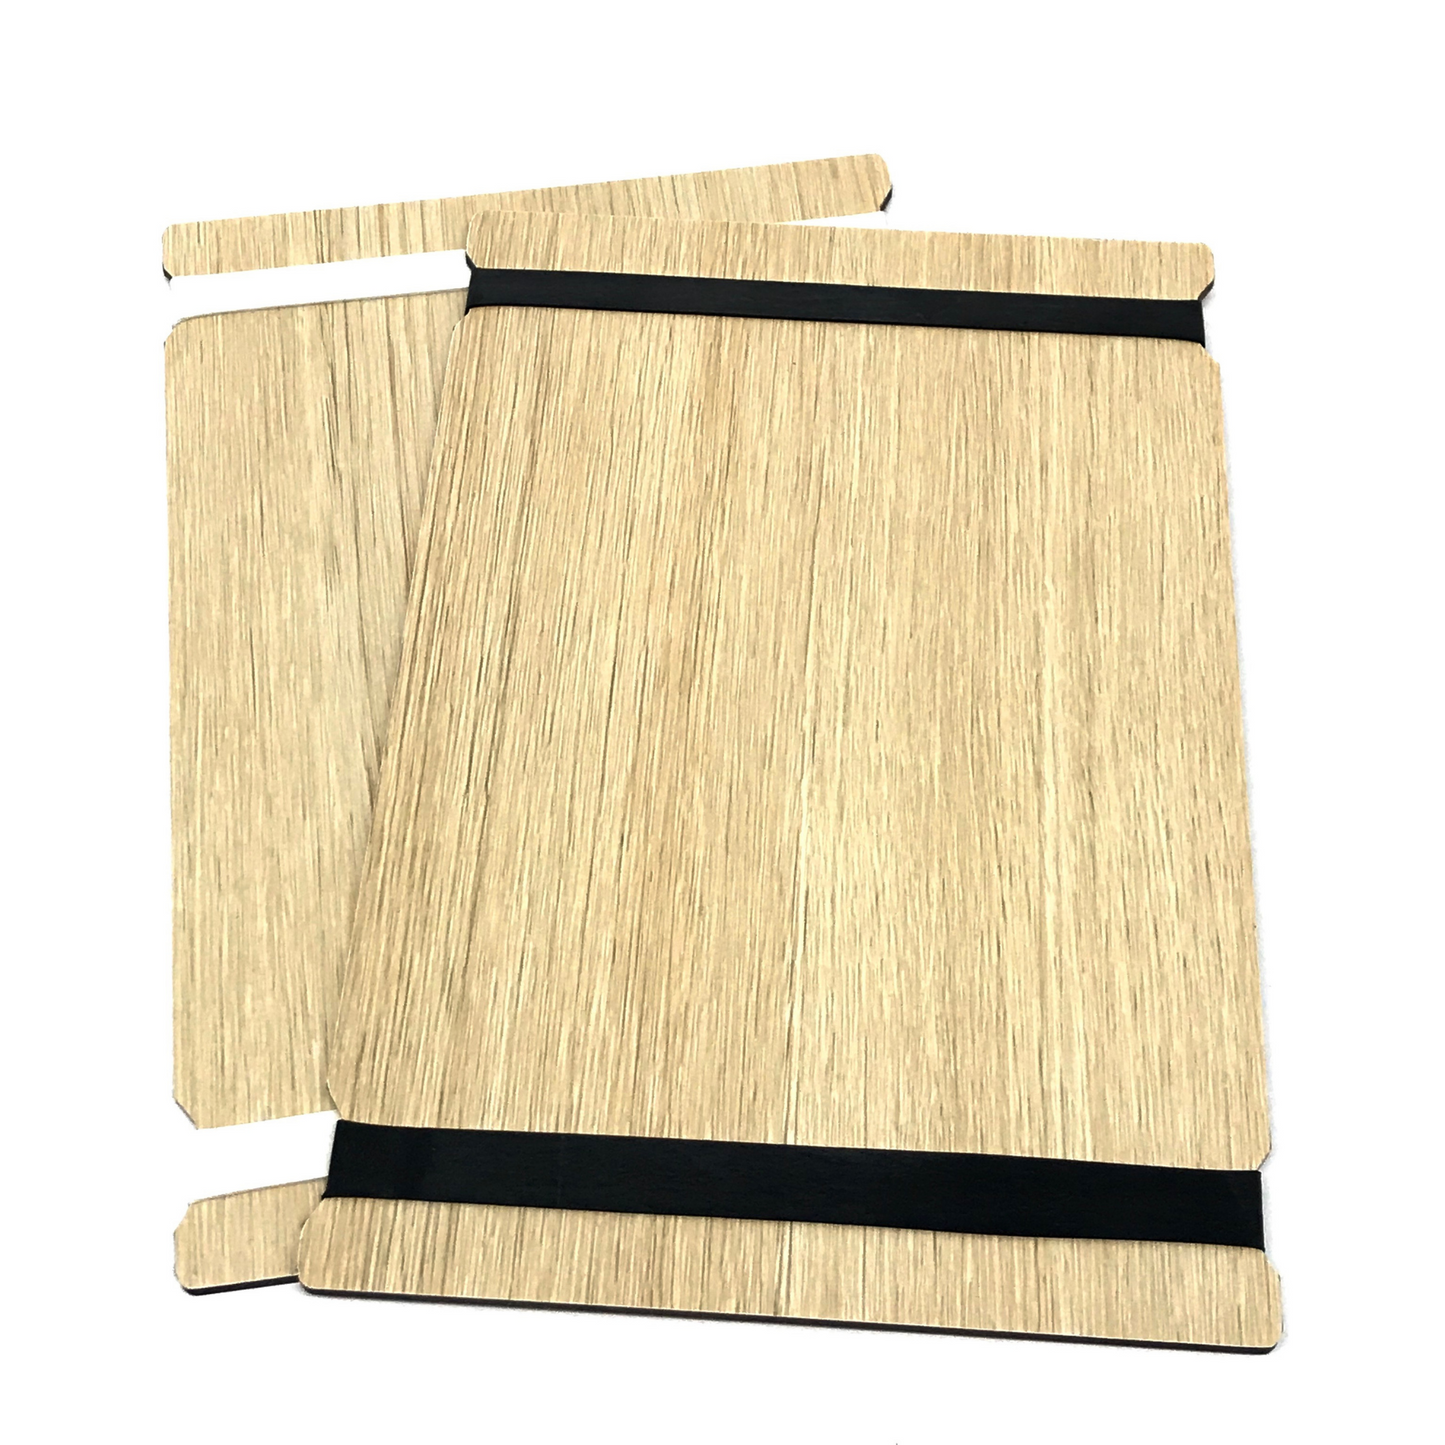 Rubber Bands for Menu Boards